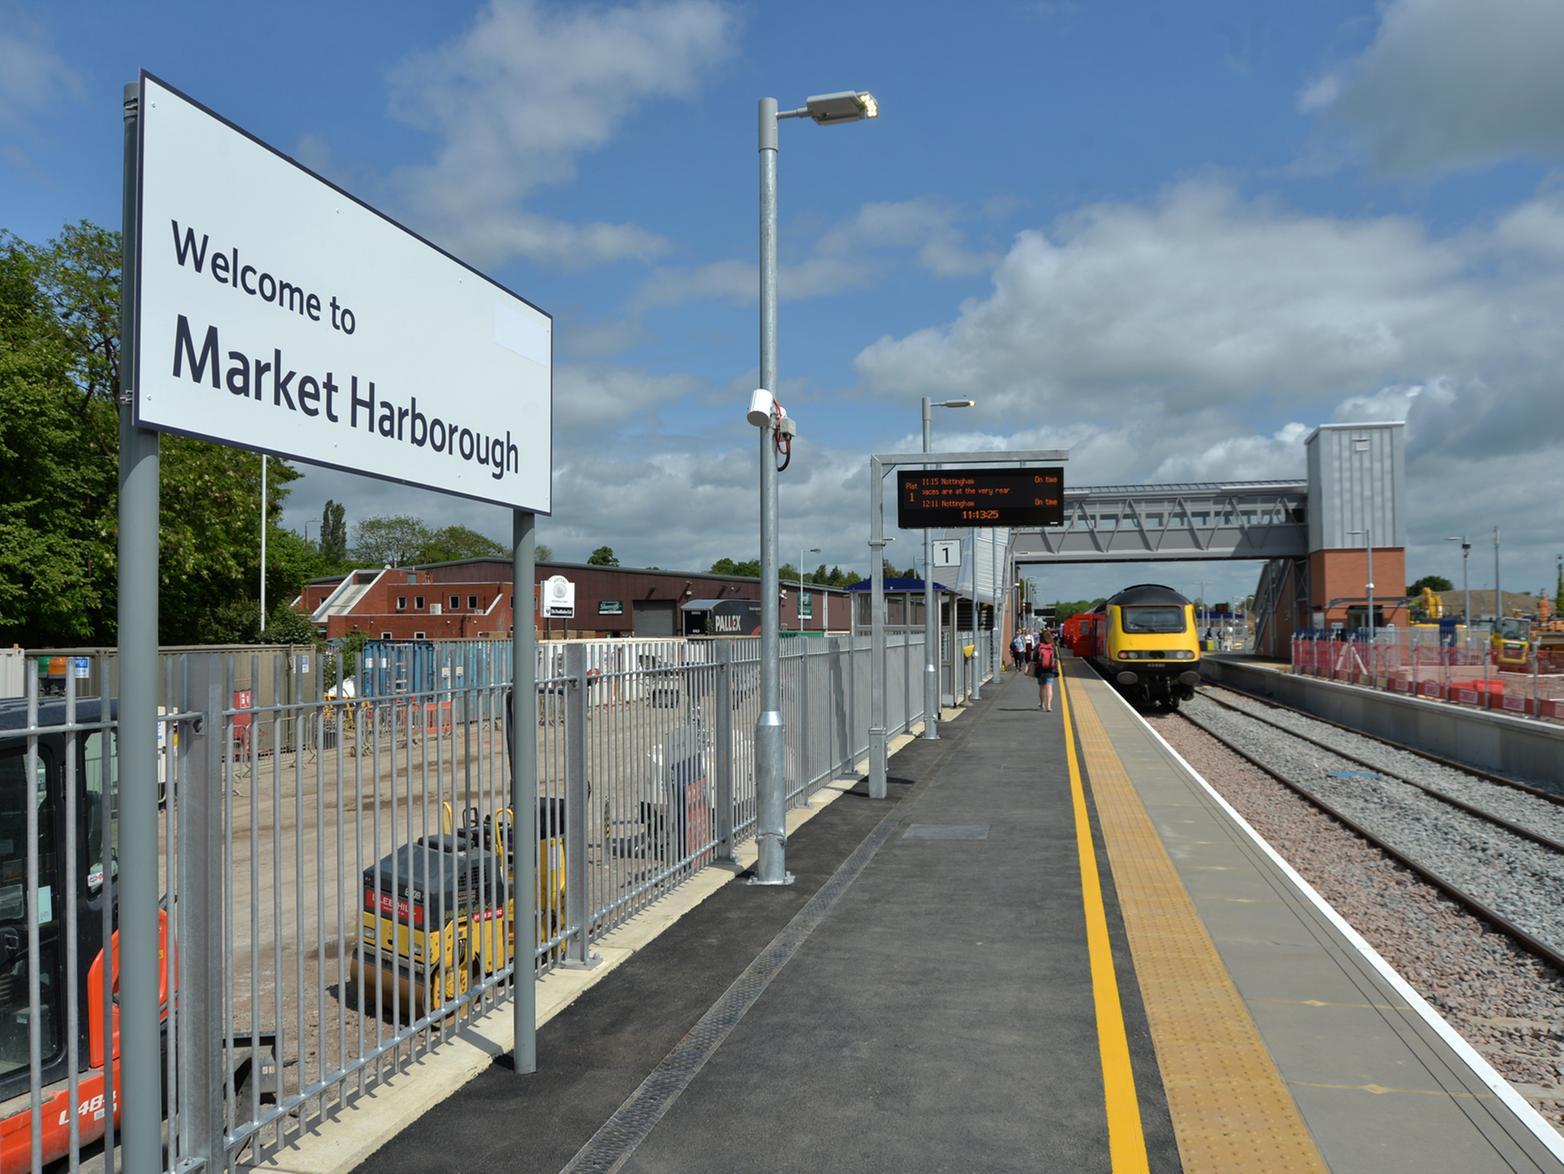 Market Harborough Station reopened for trains after engineering work was completed.
The work saw Network Rail connect almost 4km of newly laid track into the existing alignment and saw no trains running through the station until it reopened in June.
This has created a straighter rail line through the station and will enable trains to travel at higher speeds. A new accessible footbridge which will widen travel opportunities for more people has also opened.
To allow this work to take place safely, no trains were able to run on this portion of the line and instead, coach replacement and diversionary routes were in place to keep passengers moving.
The work was a key part of the Midland Main Line Upgrade, which is the biggest investment into the line since the Victorian era.